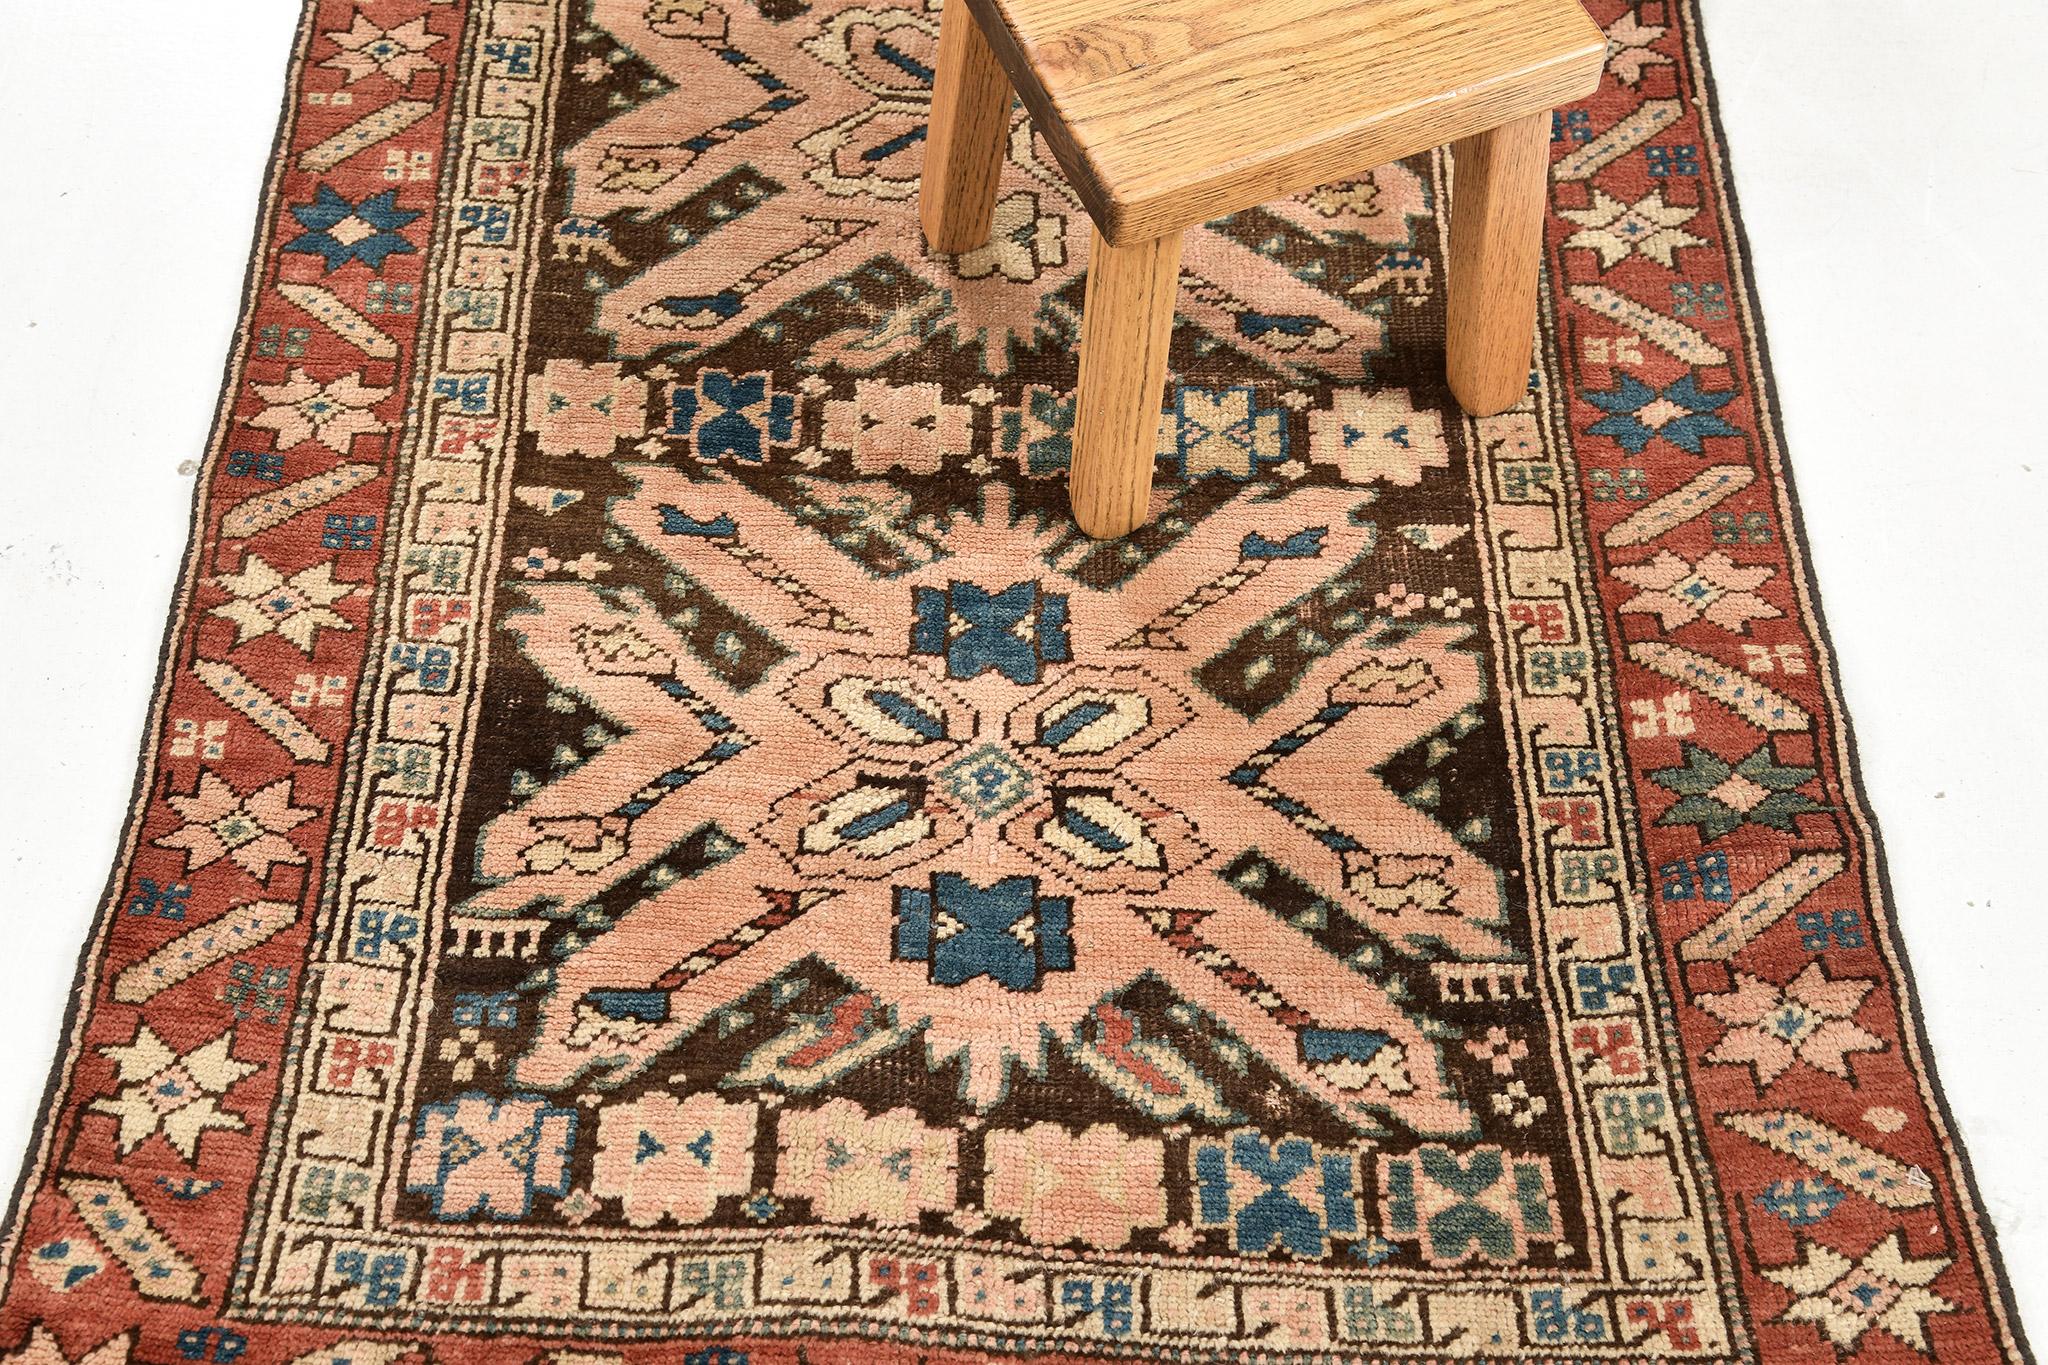 This genuine antique Russian Gharabagh rug is a beautiful runner piece styled in the tribal design out of wool using the pile weave method. The multicolored rug is framed by a blushing lattice border. Come by our design studio for more luxury rug